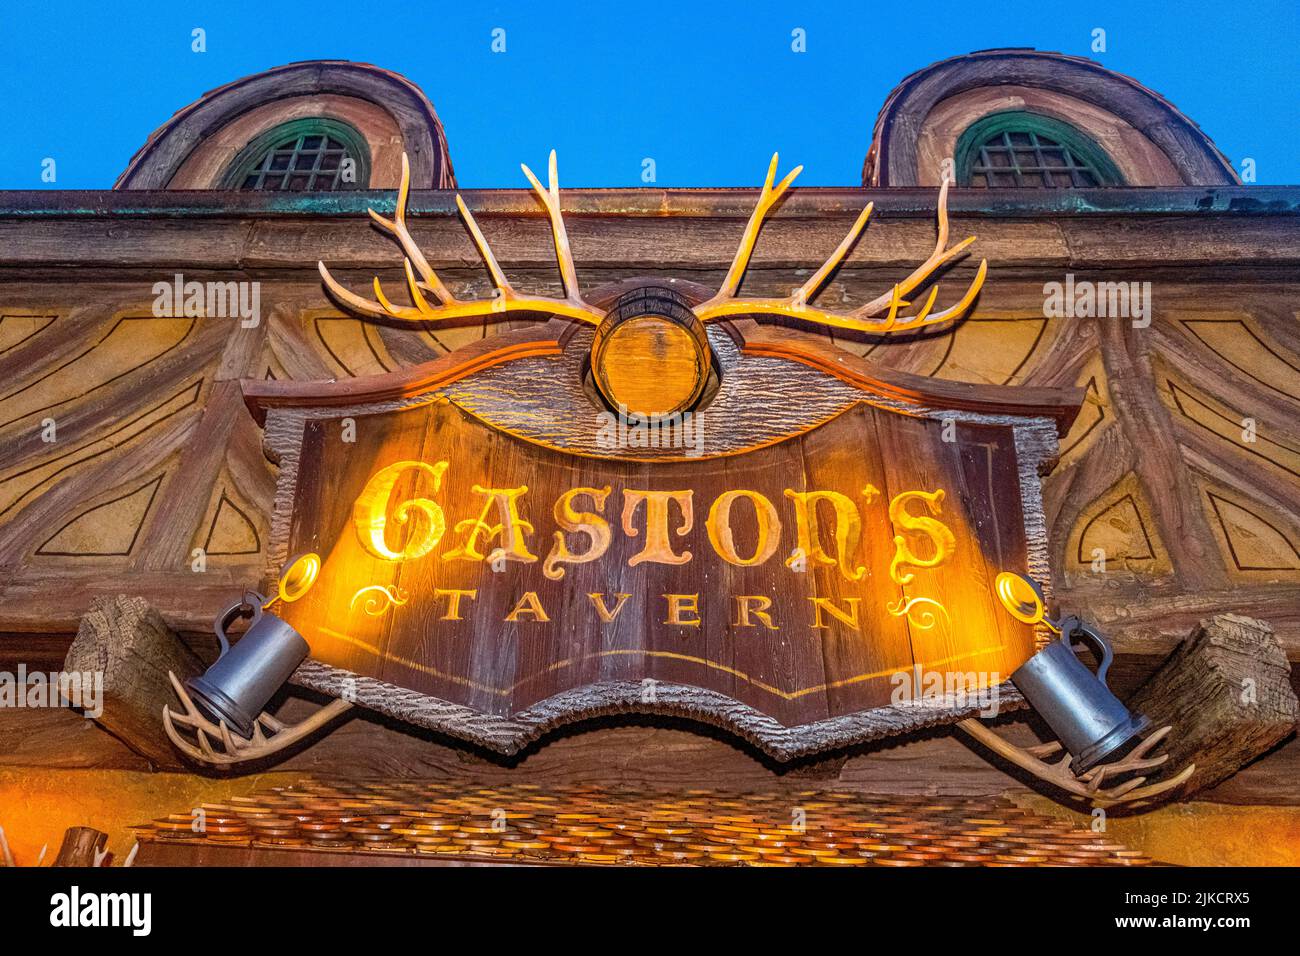 Entrance sign in the Gaston's Tavern Stock Photo